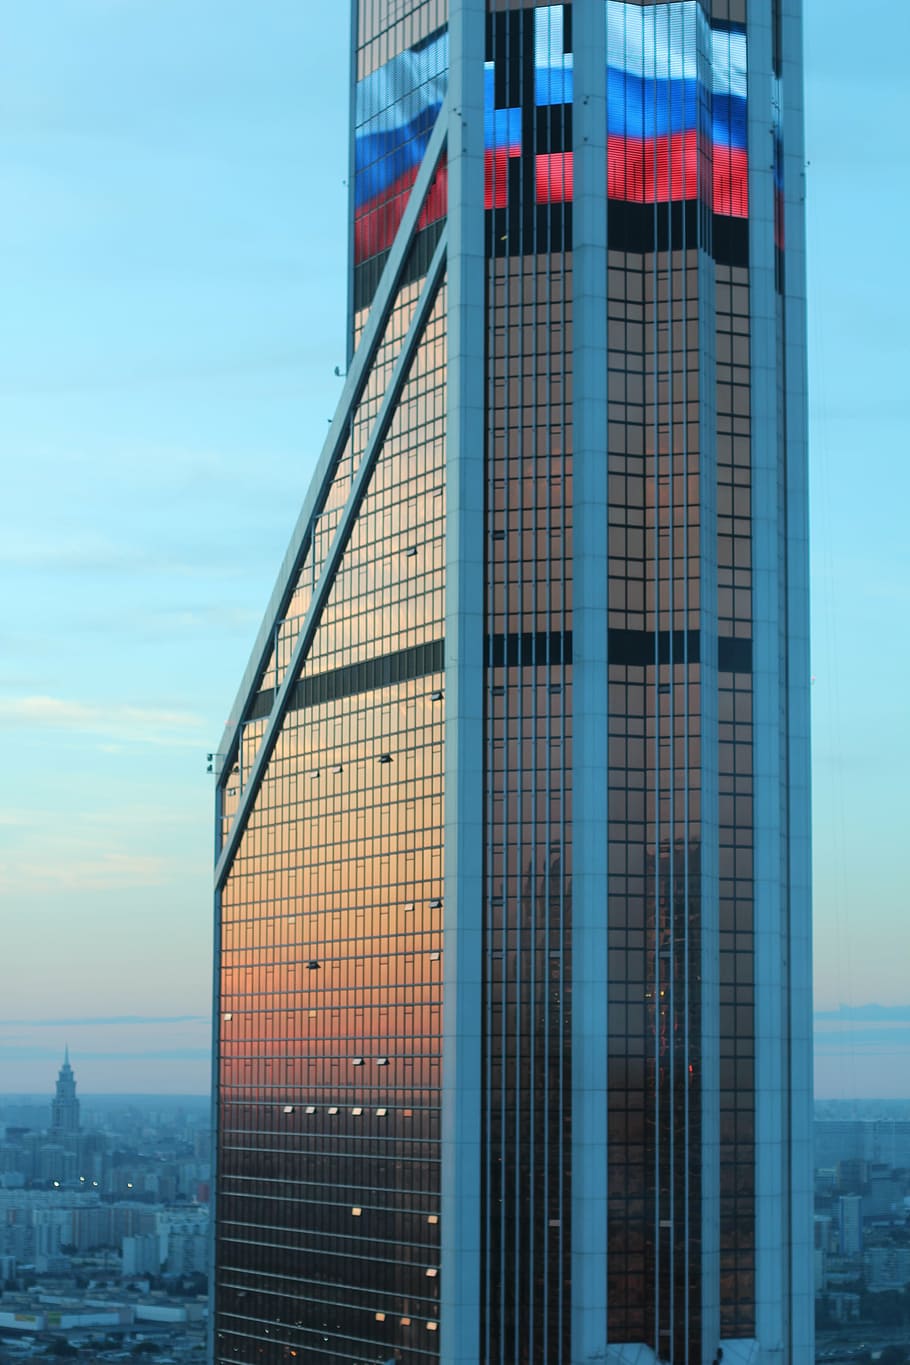 russia, moscow, new city, skyscrapers, skyline, glass facade, flag, built structure, architecture, building exterior